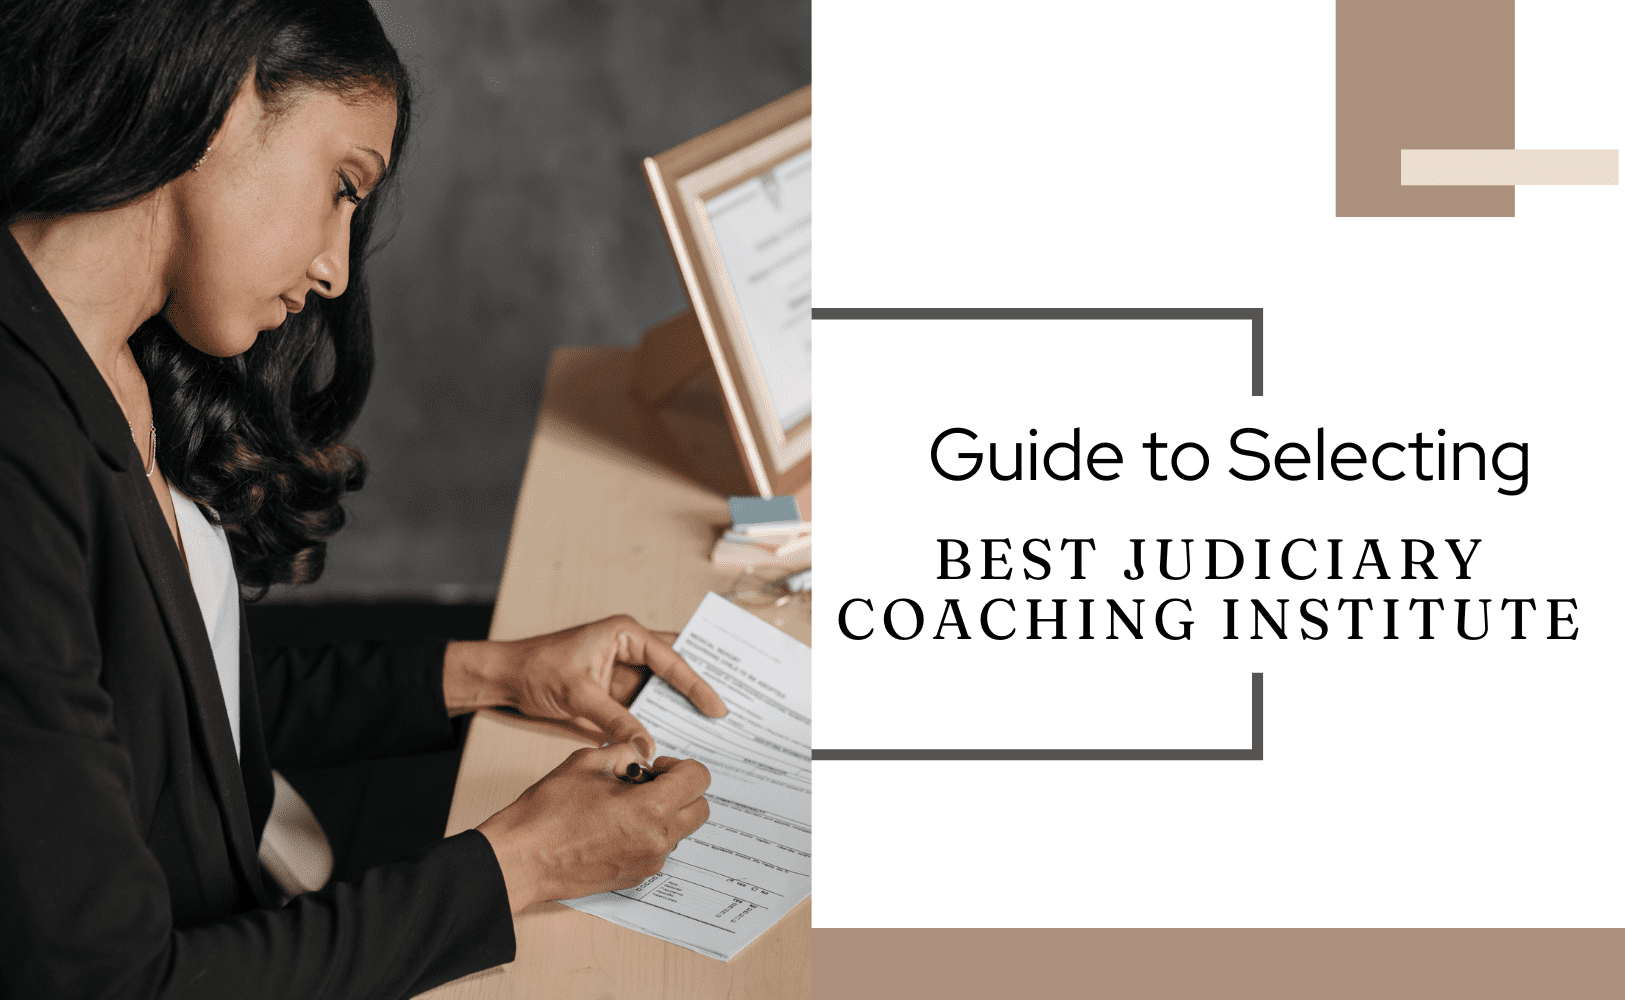 Guide to Selecting the Best Judiciary Coaching Institute